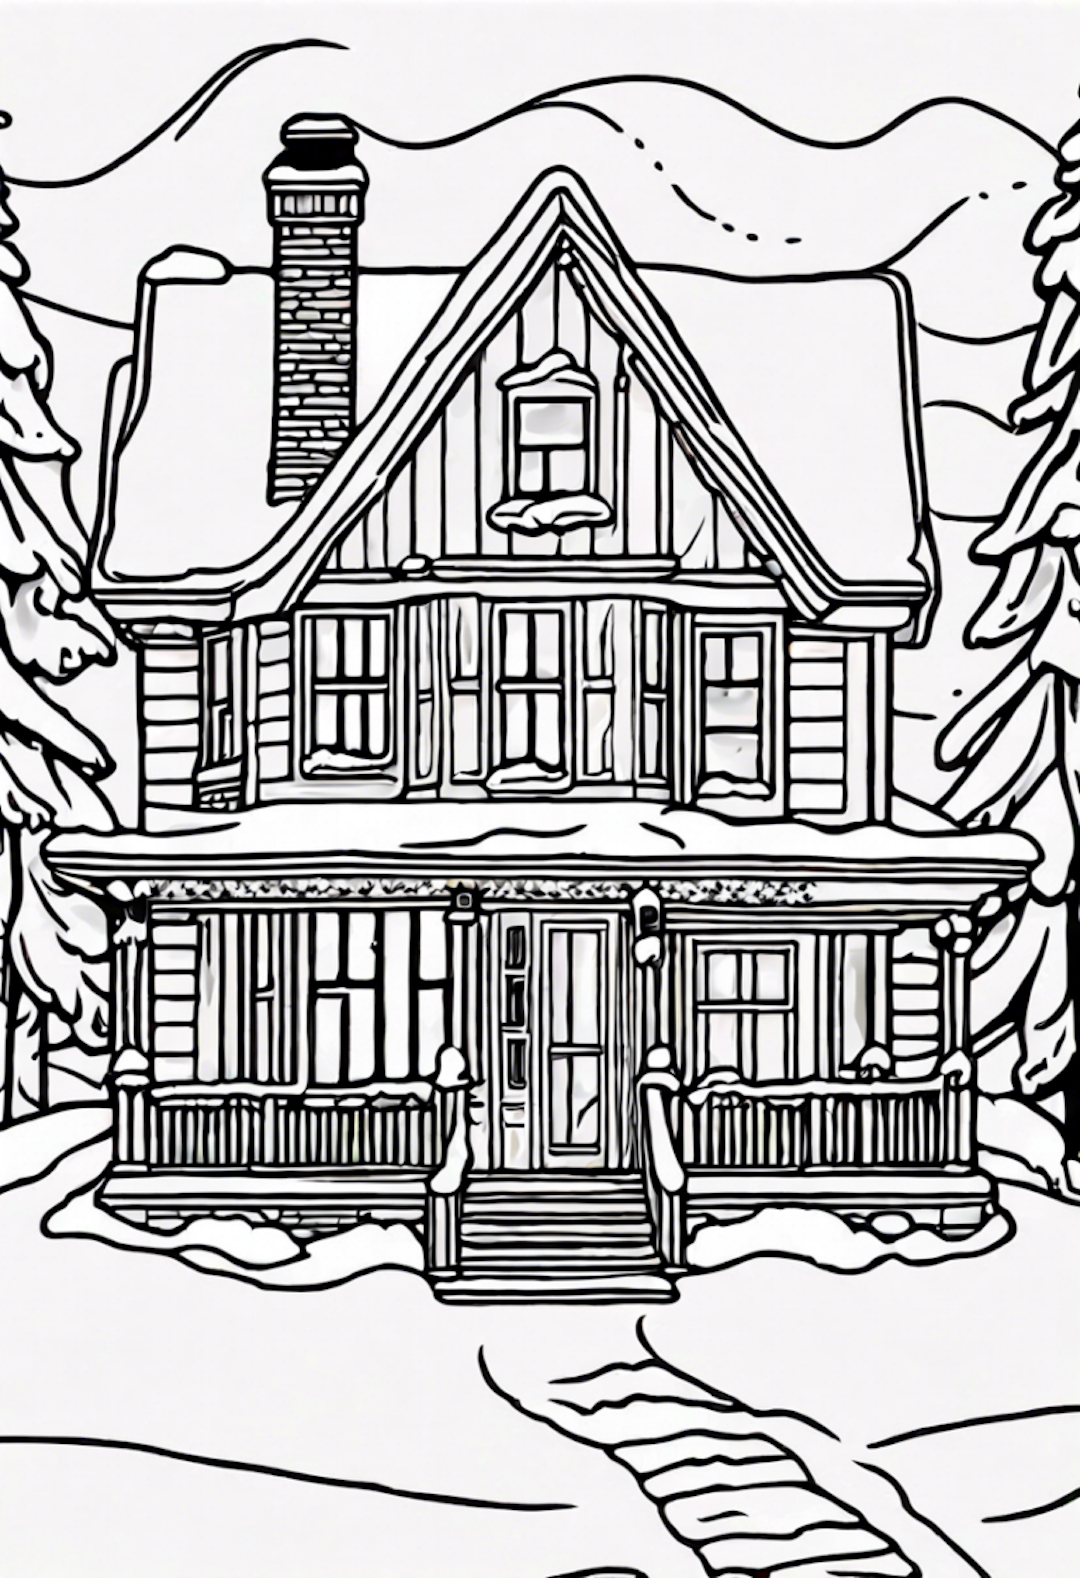 Intricate Cozy Snowy House At Christmas Time coloring pages